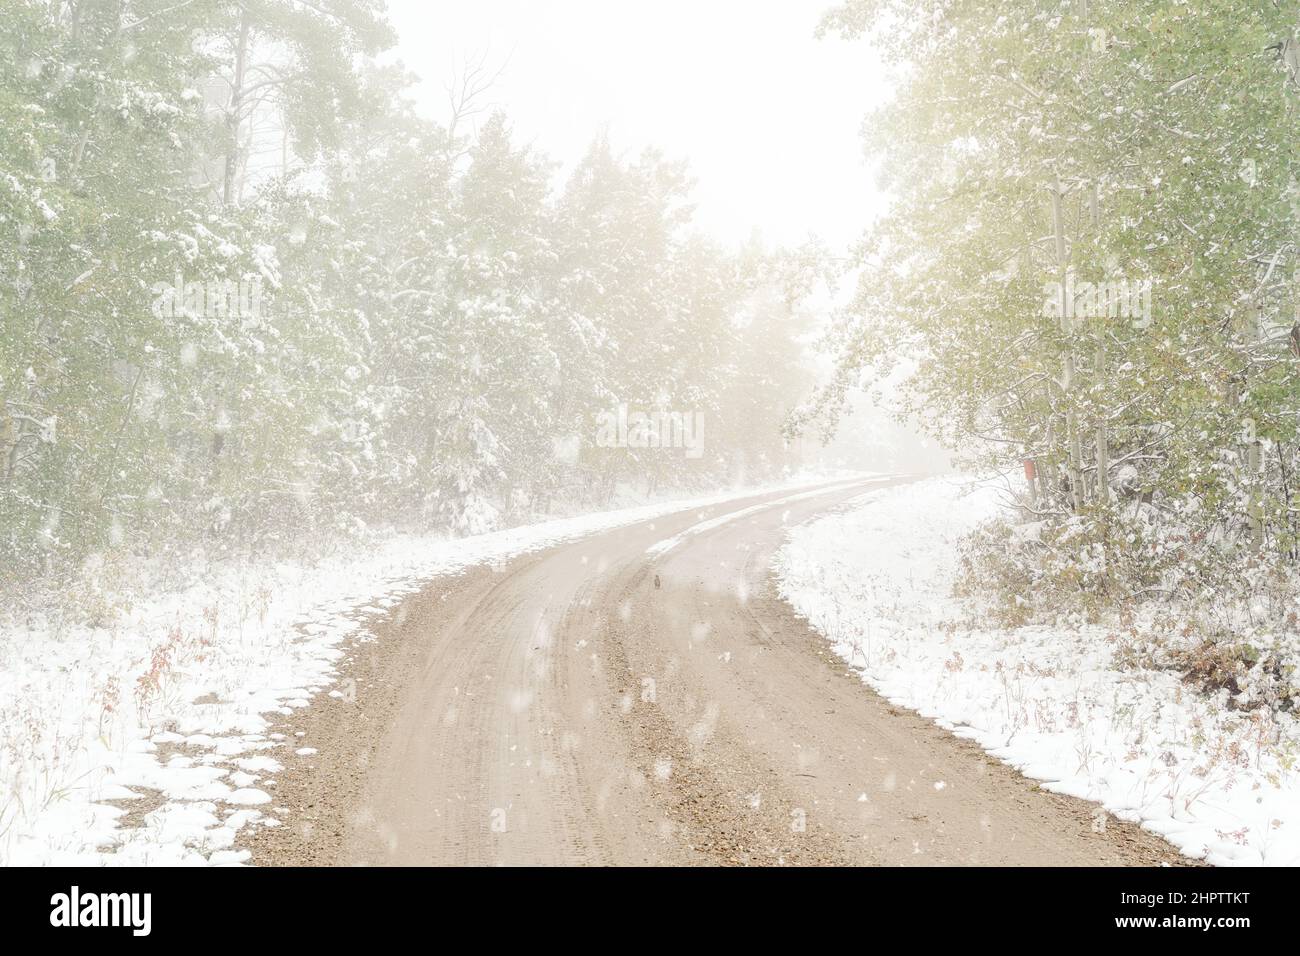 Early snowfall on a rural northern road. Stock Photo